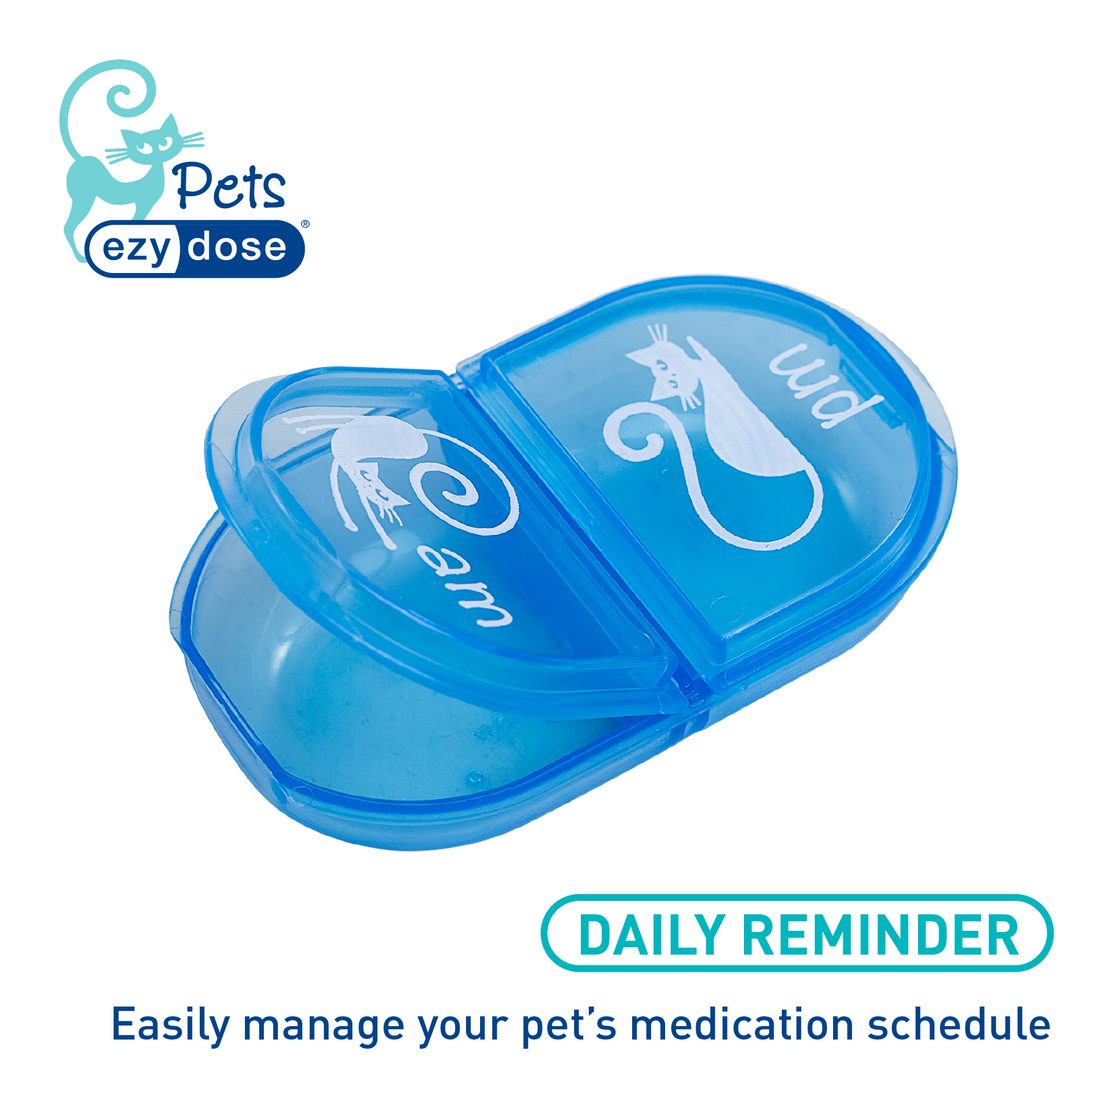 Daily am/pm pill organizer helps easily manage your pet&